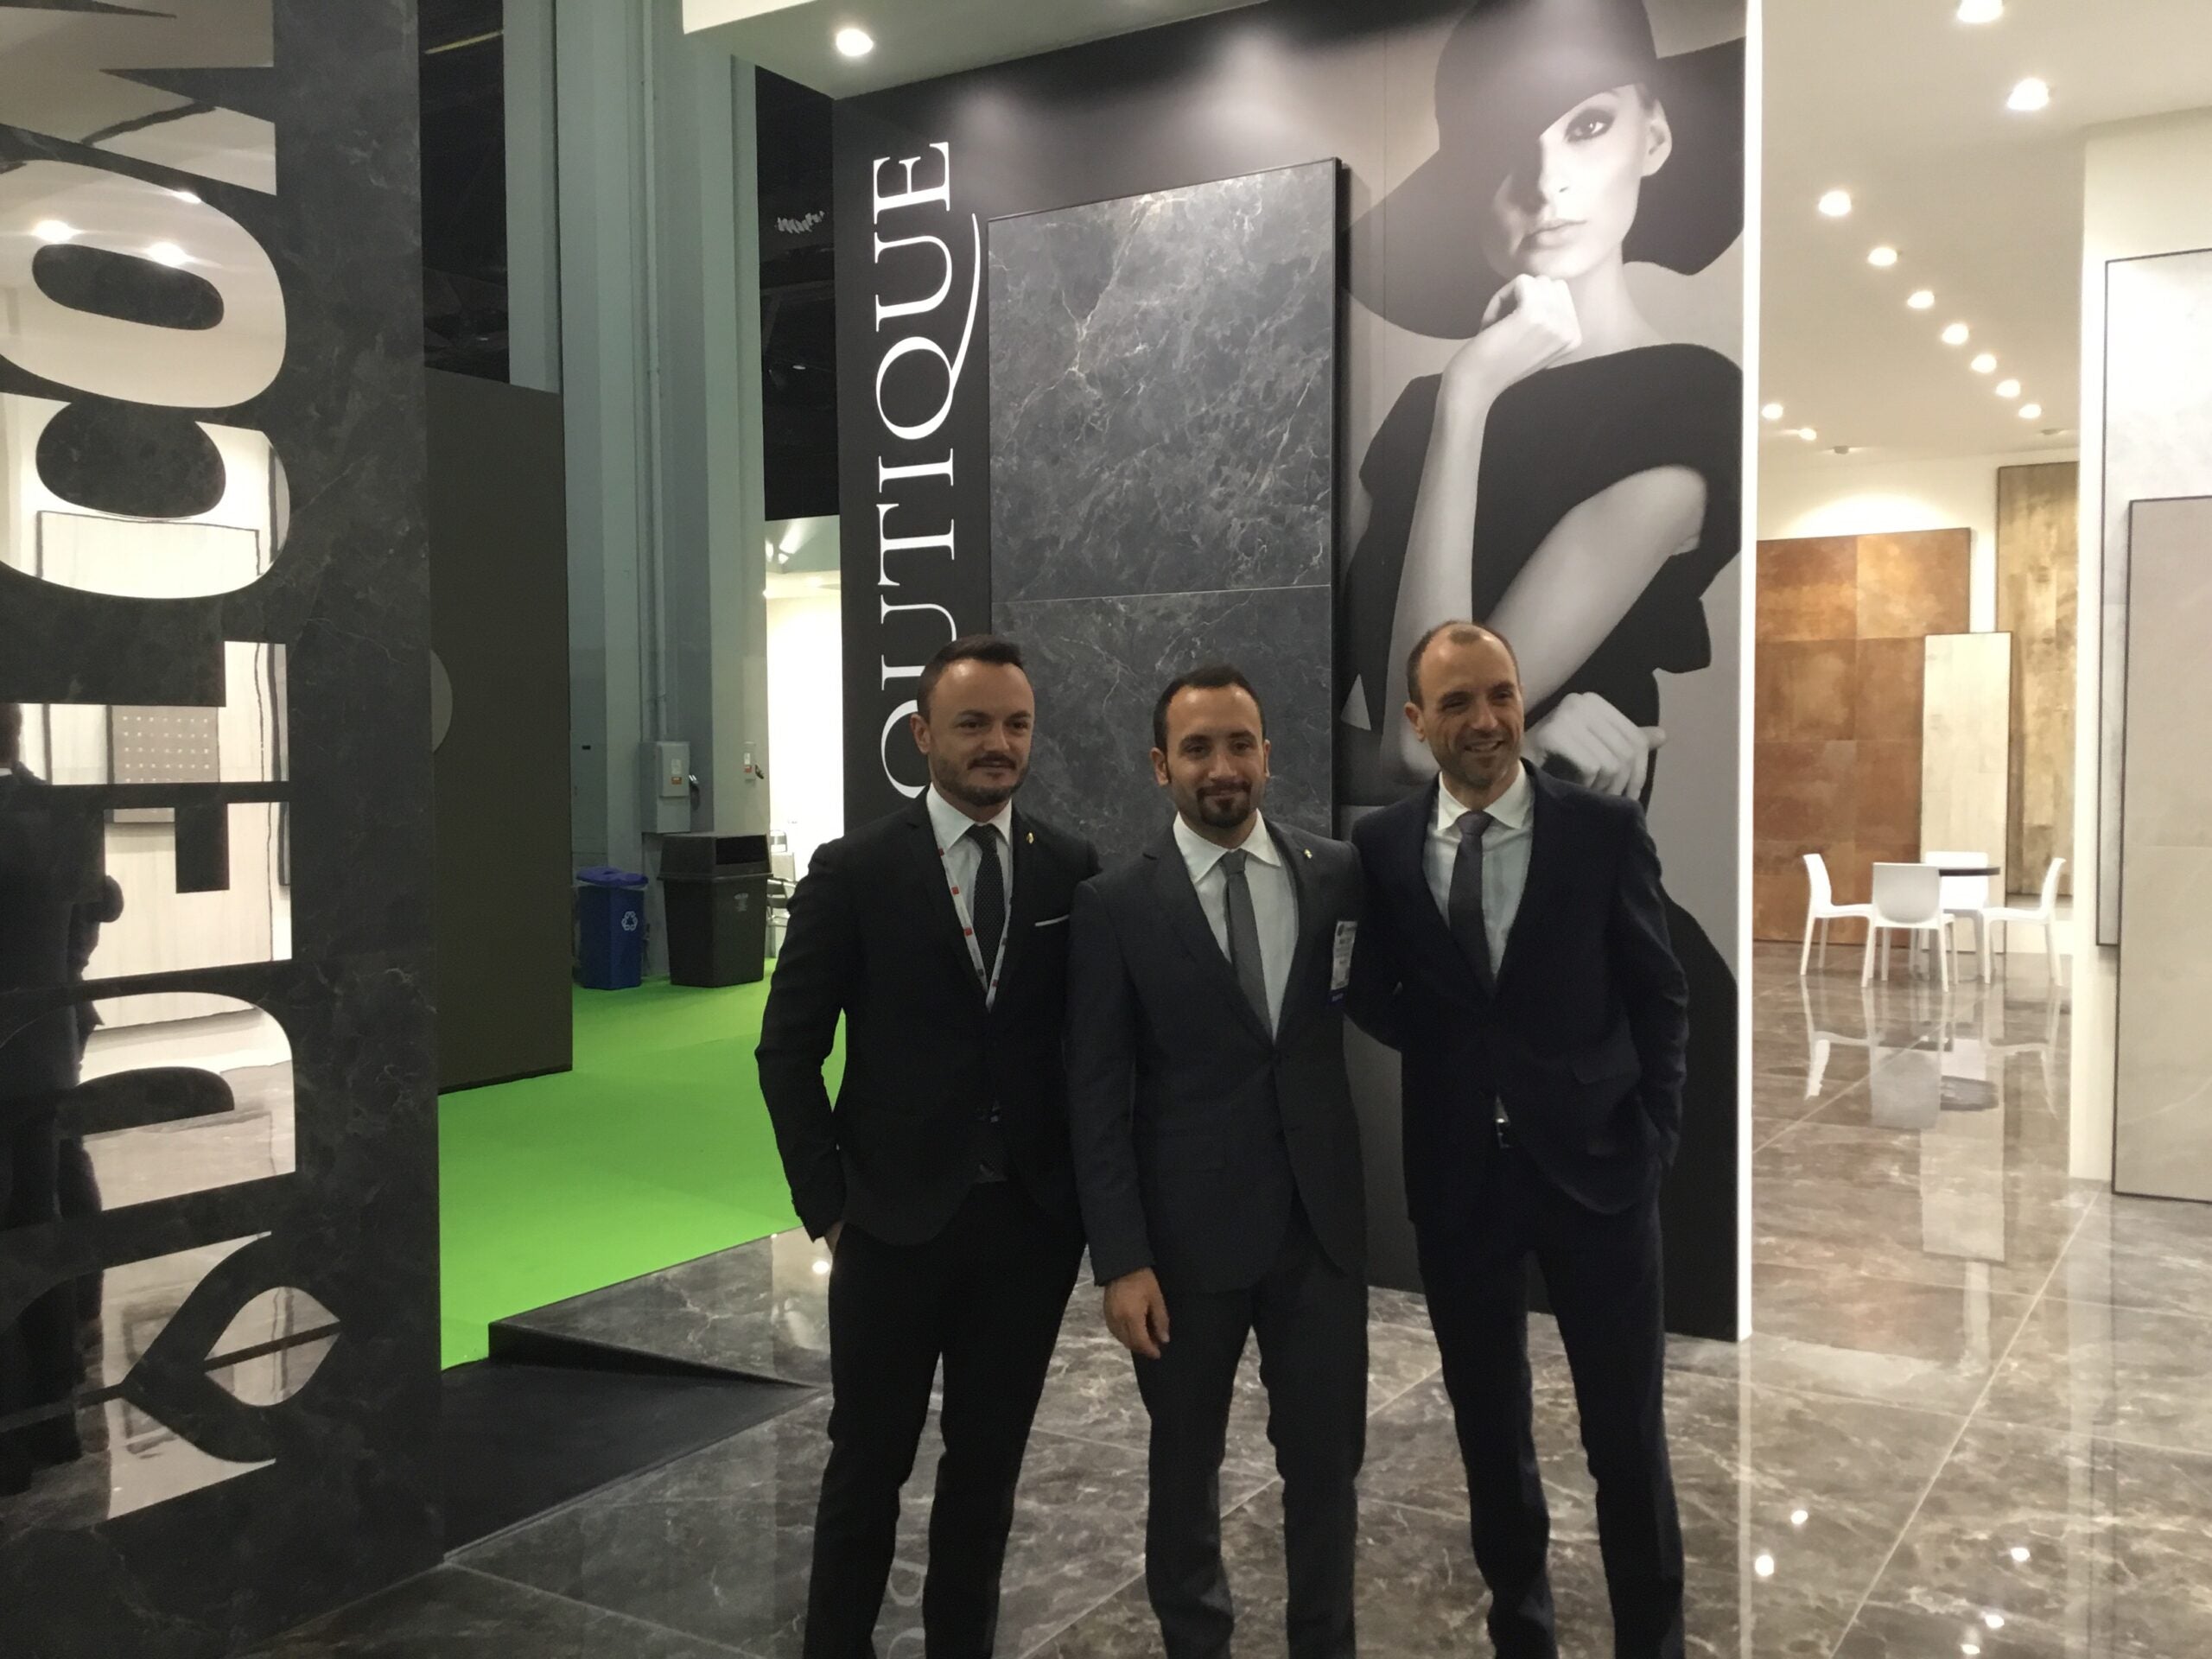 LIVE FROM COVERINGS 2018, BOOTH 1616